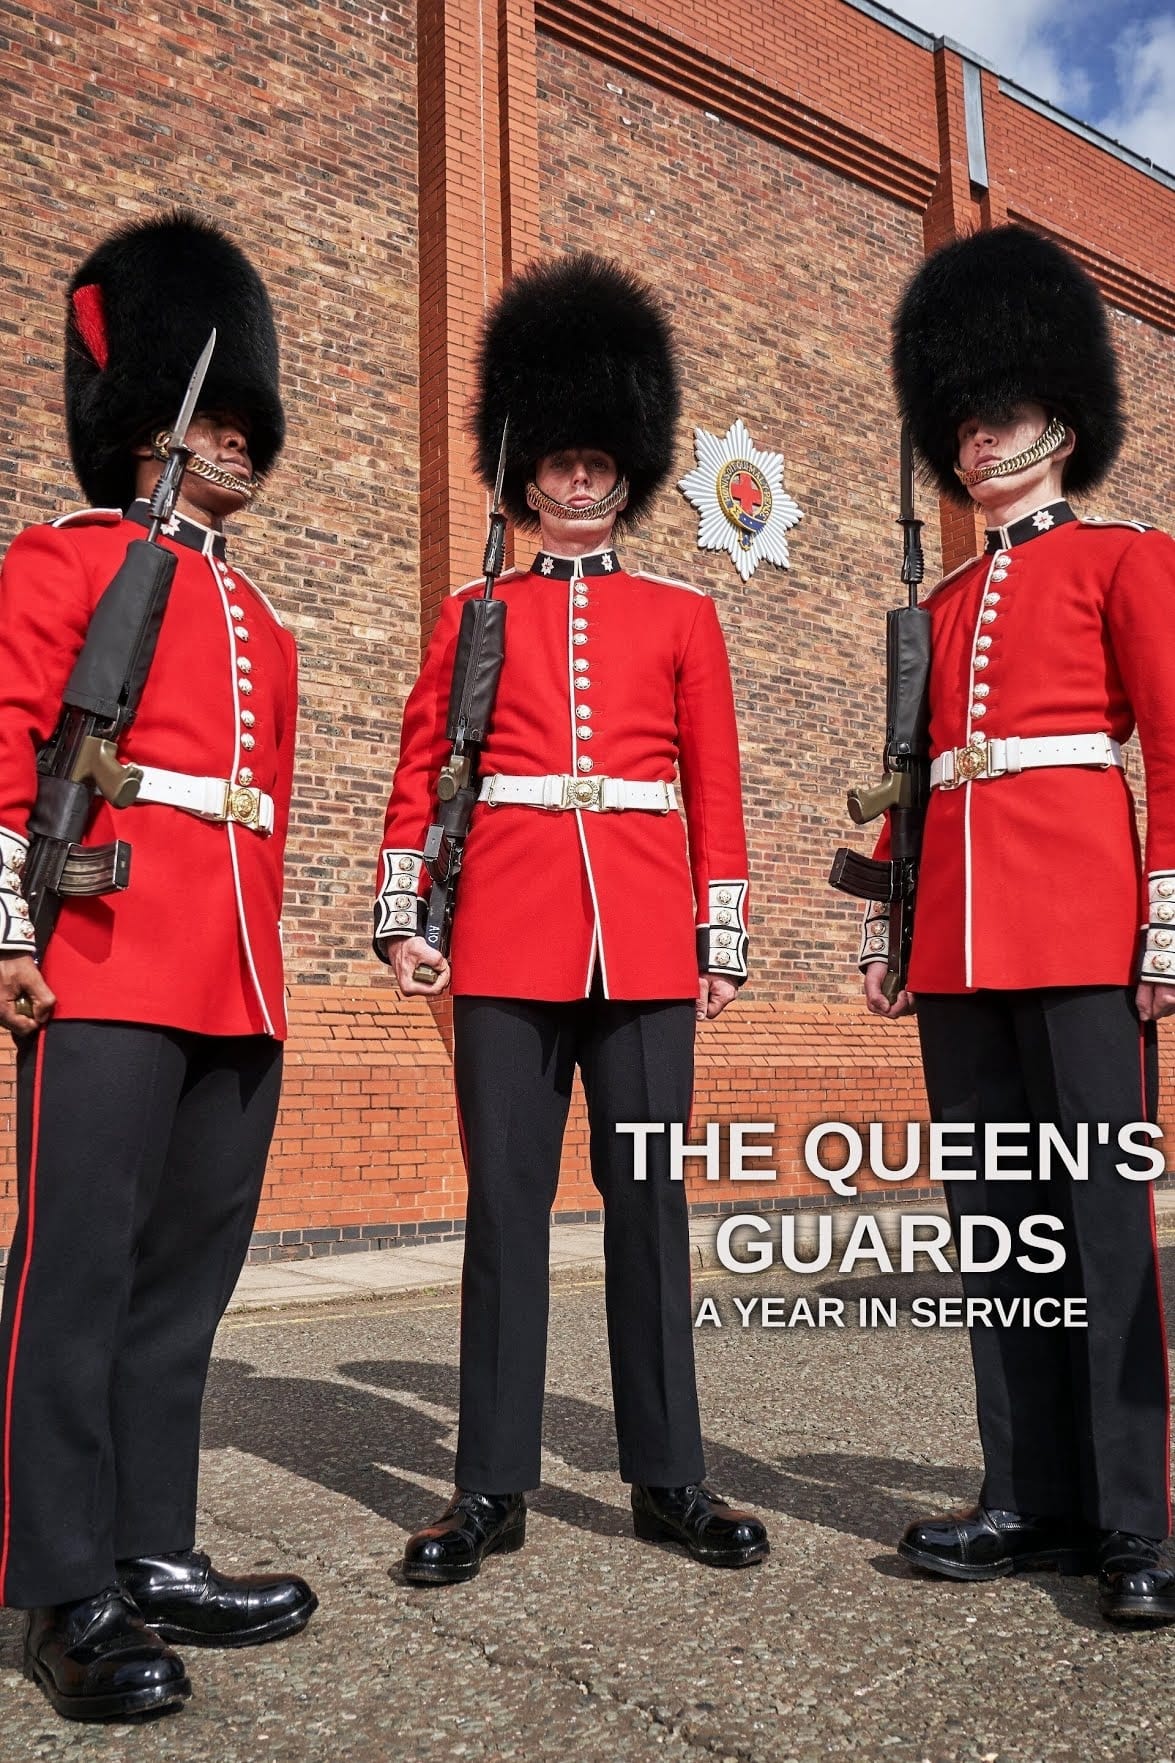 The Queen's Guards: On Her Majesty's Service TV Shows About Queen